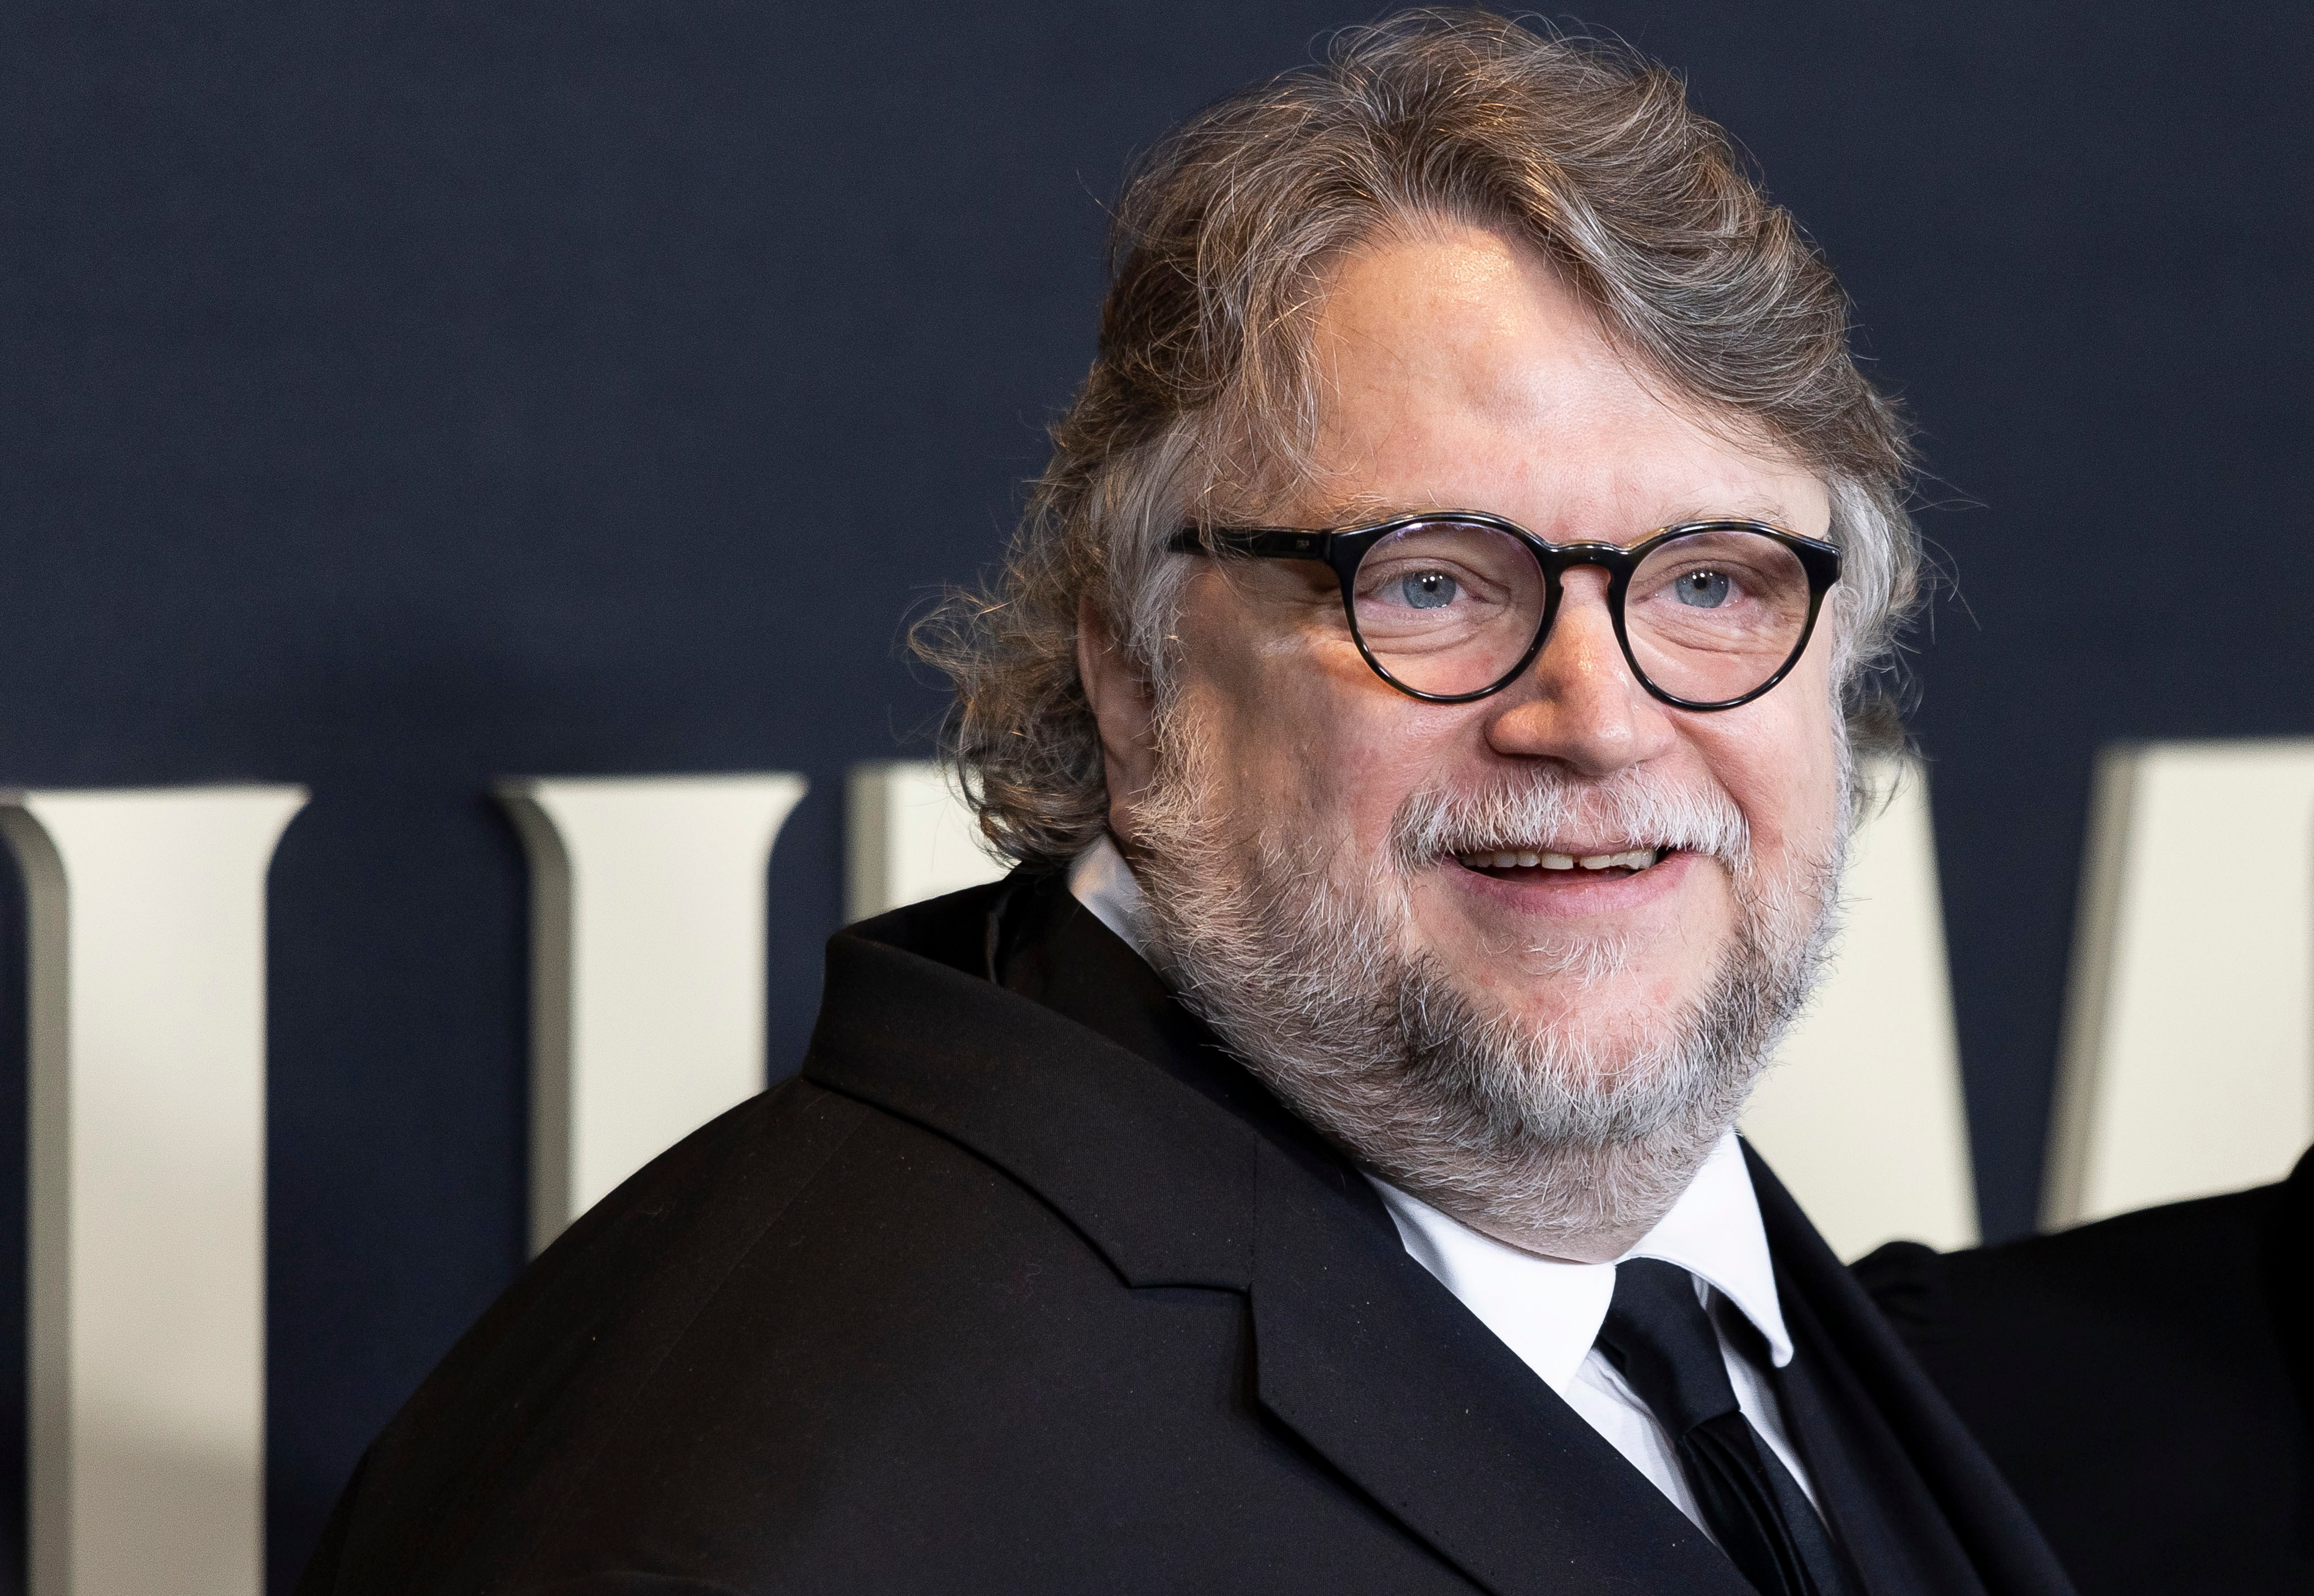 In the 94th edition of the awards, Guillermo del Toro will contain in the category for Best Film (Photo: EFE/Justin Lane)